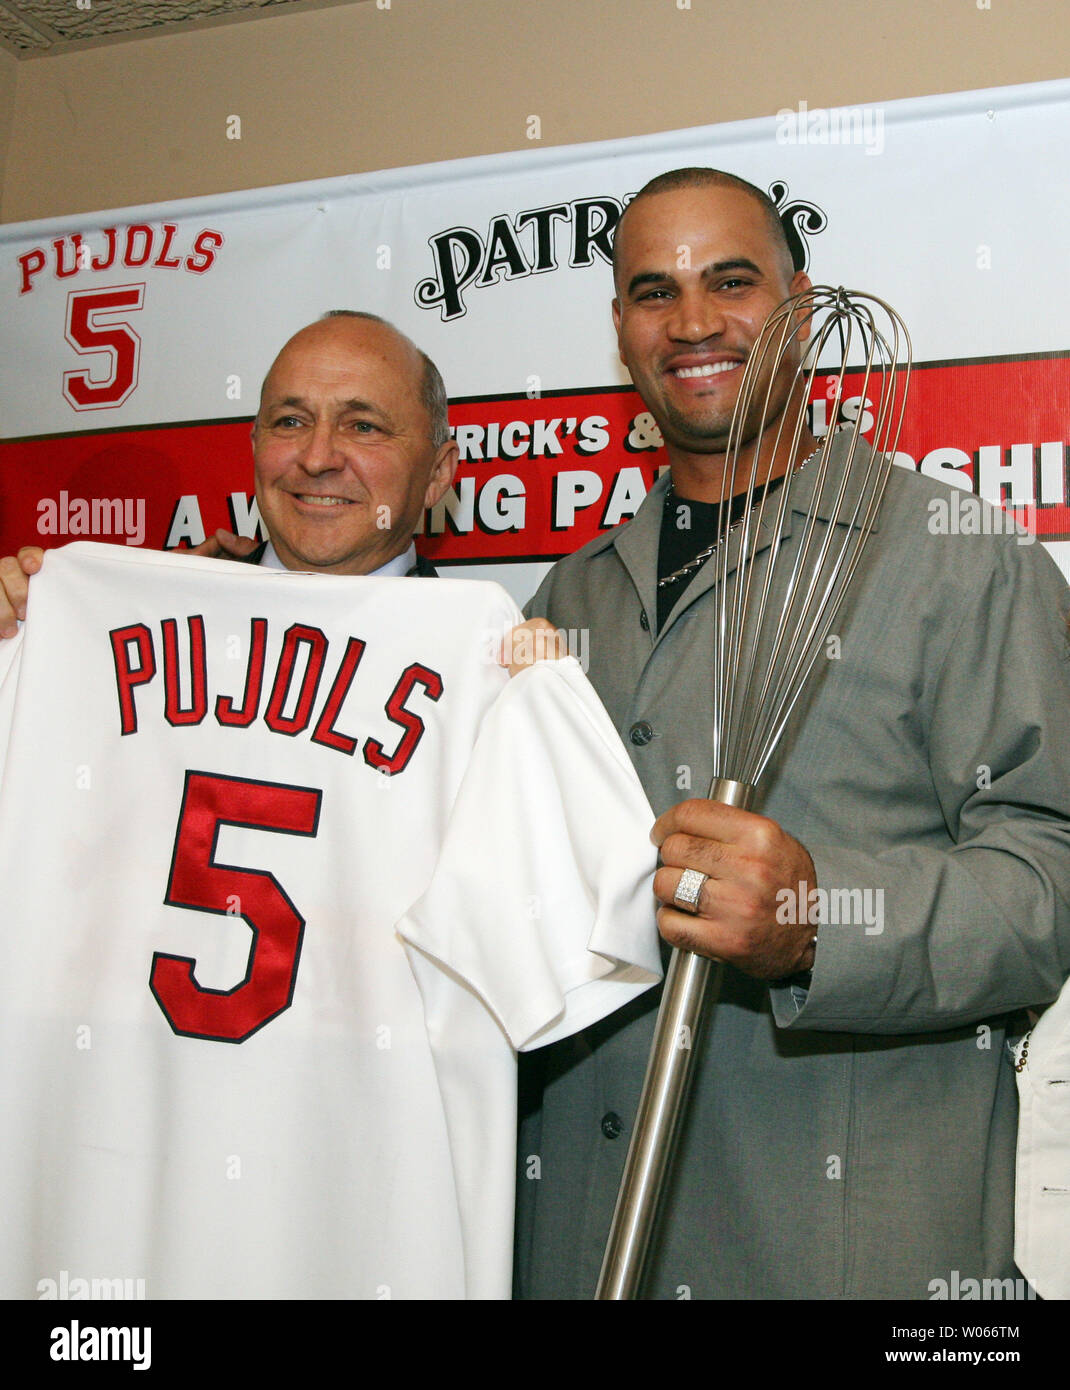 St. Louis Cardinals Albert Pujols (R) along with  Hanon Management Group's Patrick Hanon, pose for a photograph with a wisk after announcing the partnership of a group that will open a resturant in the fall called PUJOLS FIVE, in the Westport area of St. Louis on June 1, 2006. The Pujols' hope that the resturant will help fund the Pujols Family Foundation, the couples 501C3 organization. (UPI Photo/Bill Greenblatt) Stock Photo